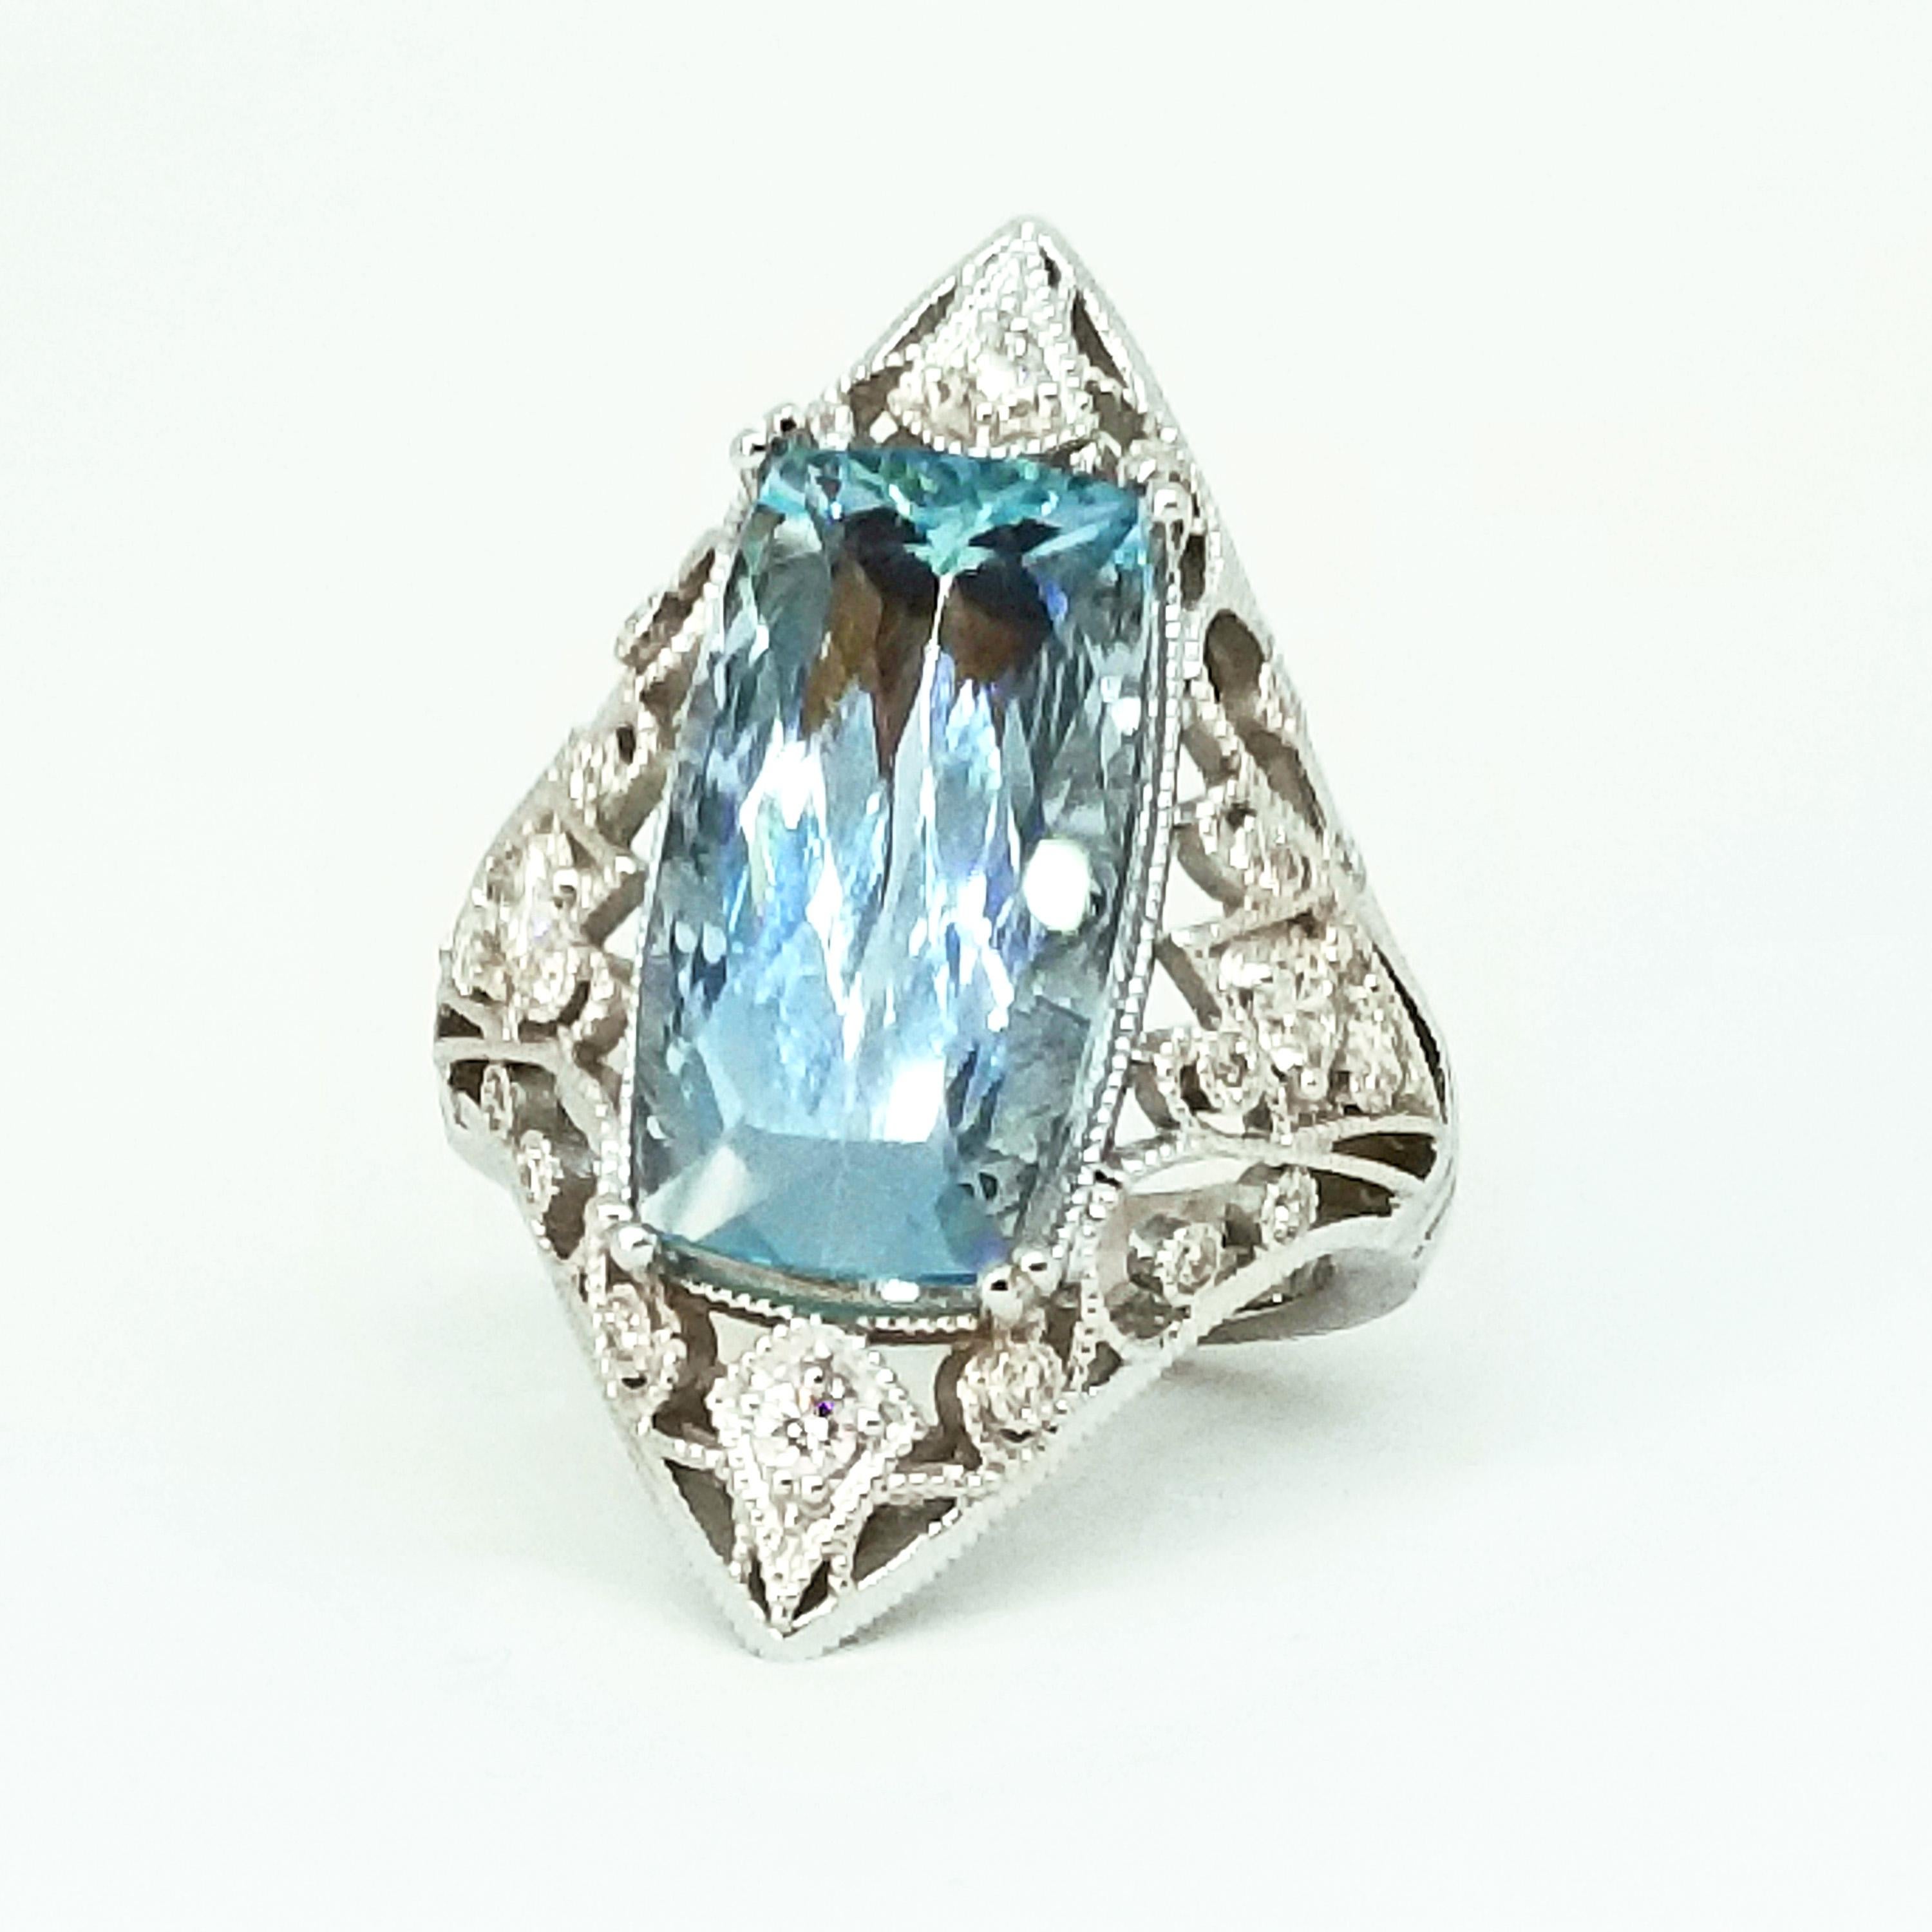 One of a Kind Statement Cocktail Ring in 18K White Gold with Hand Millegrain and Filigree Detail is Designed and Crafted by Tom Castor and features a faceted 7.15 Carat Very Fine Edwardian Cut Brazilian Aquamarine of Gem Clarity. Also set in the